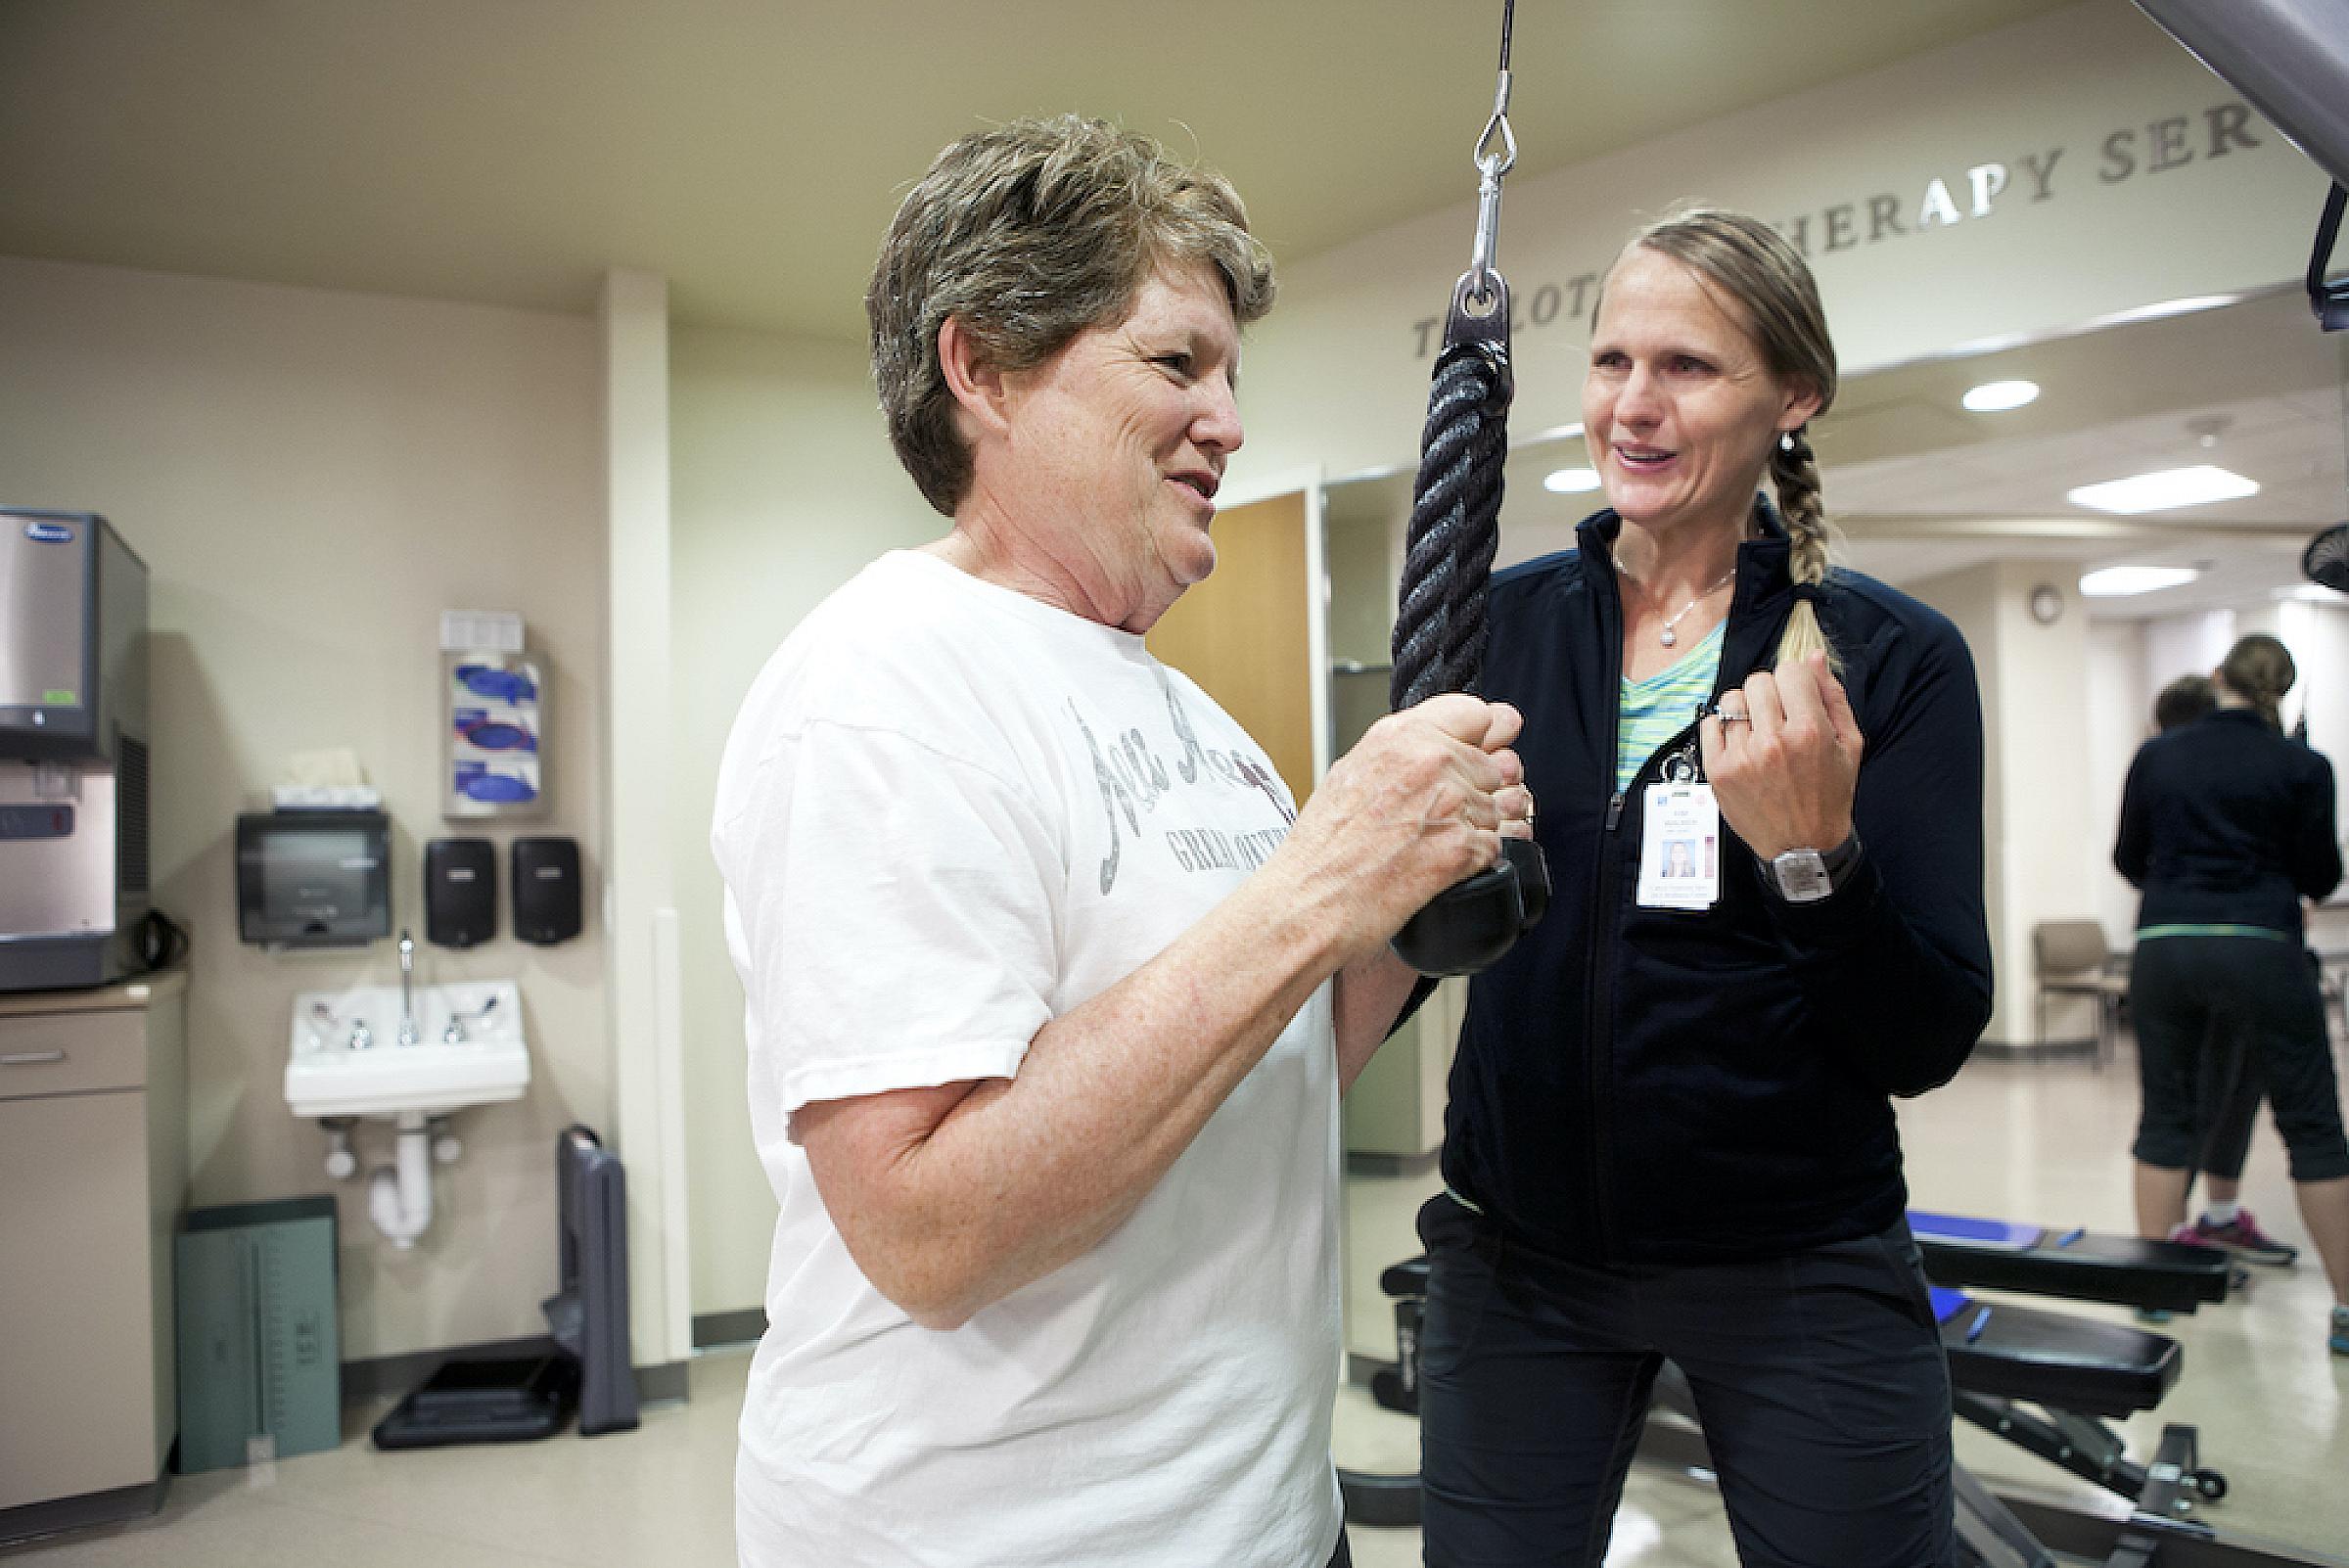 Provider assists patient while doing physical therapy exercises